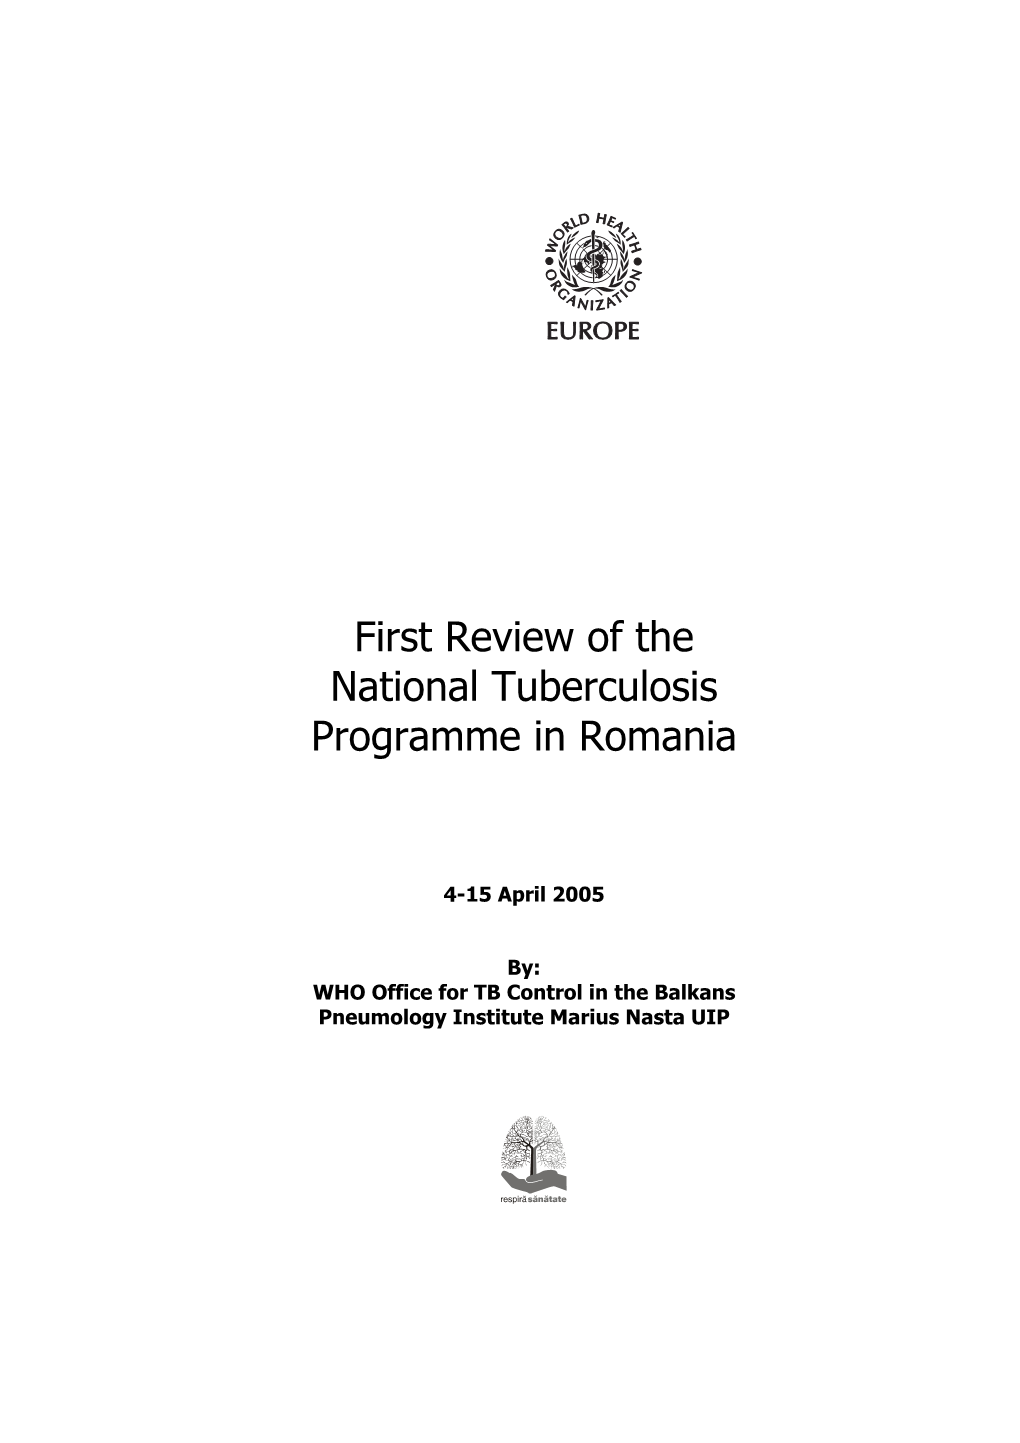 First Review of the National Tuberculosis Programme in Romania